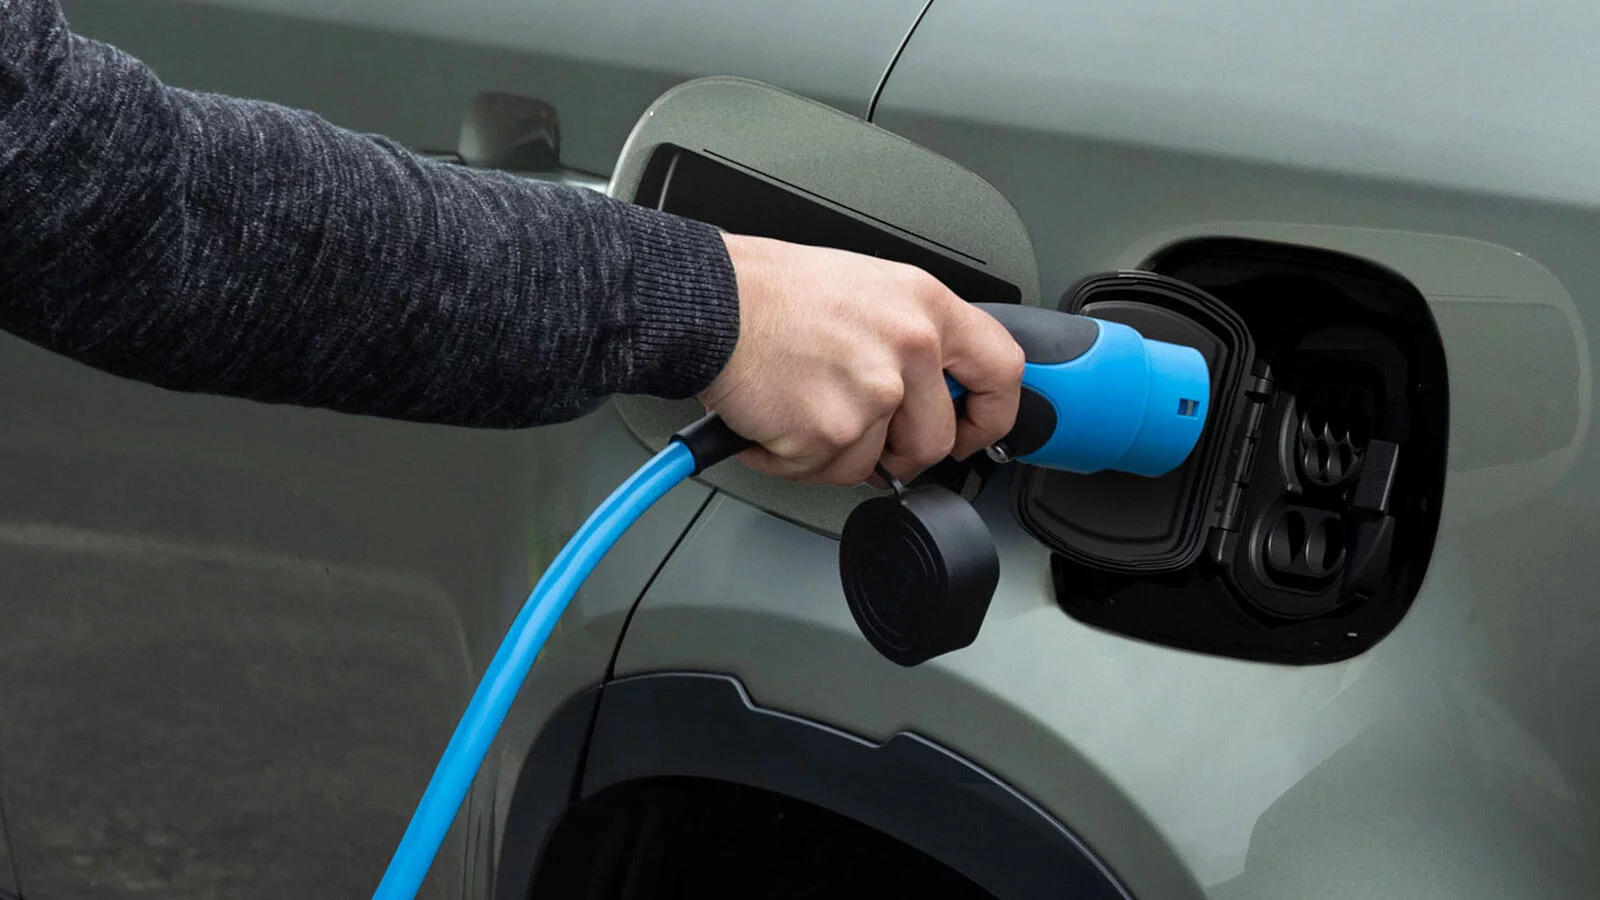 HOW TO CHARGE YOUR ELECTRIC VEHICLE